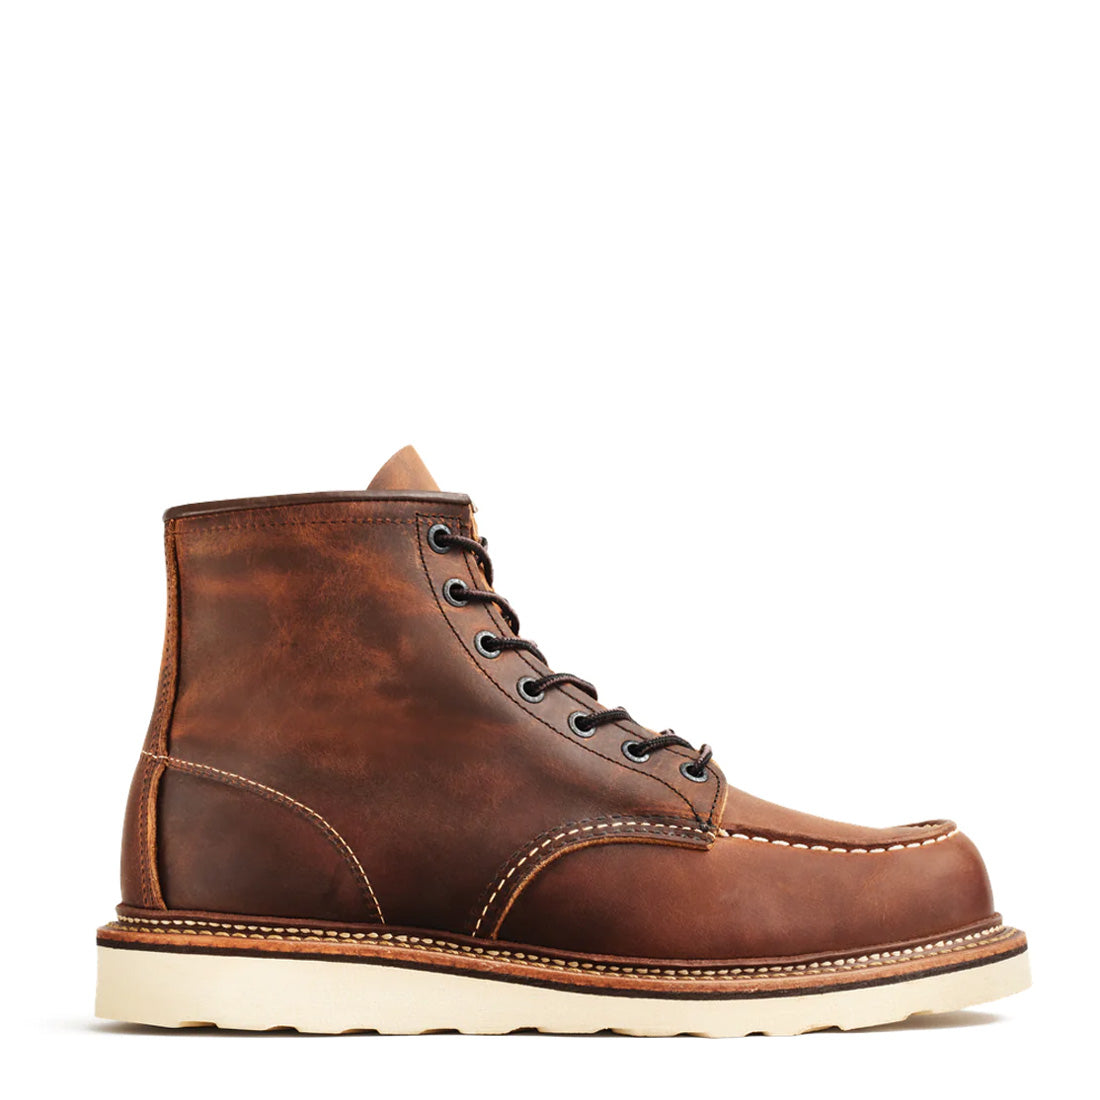 Red Wing Classic 6 Inch Moc Toe Boots Copper Rough and Tough | Yards ...